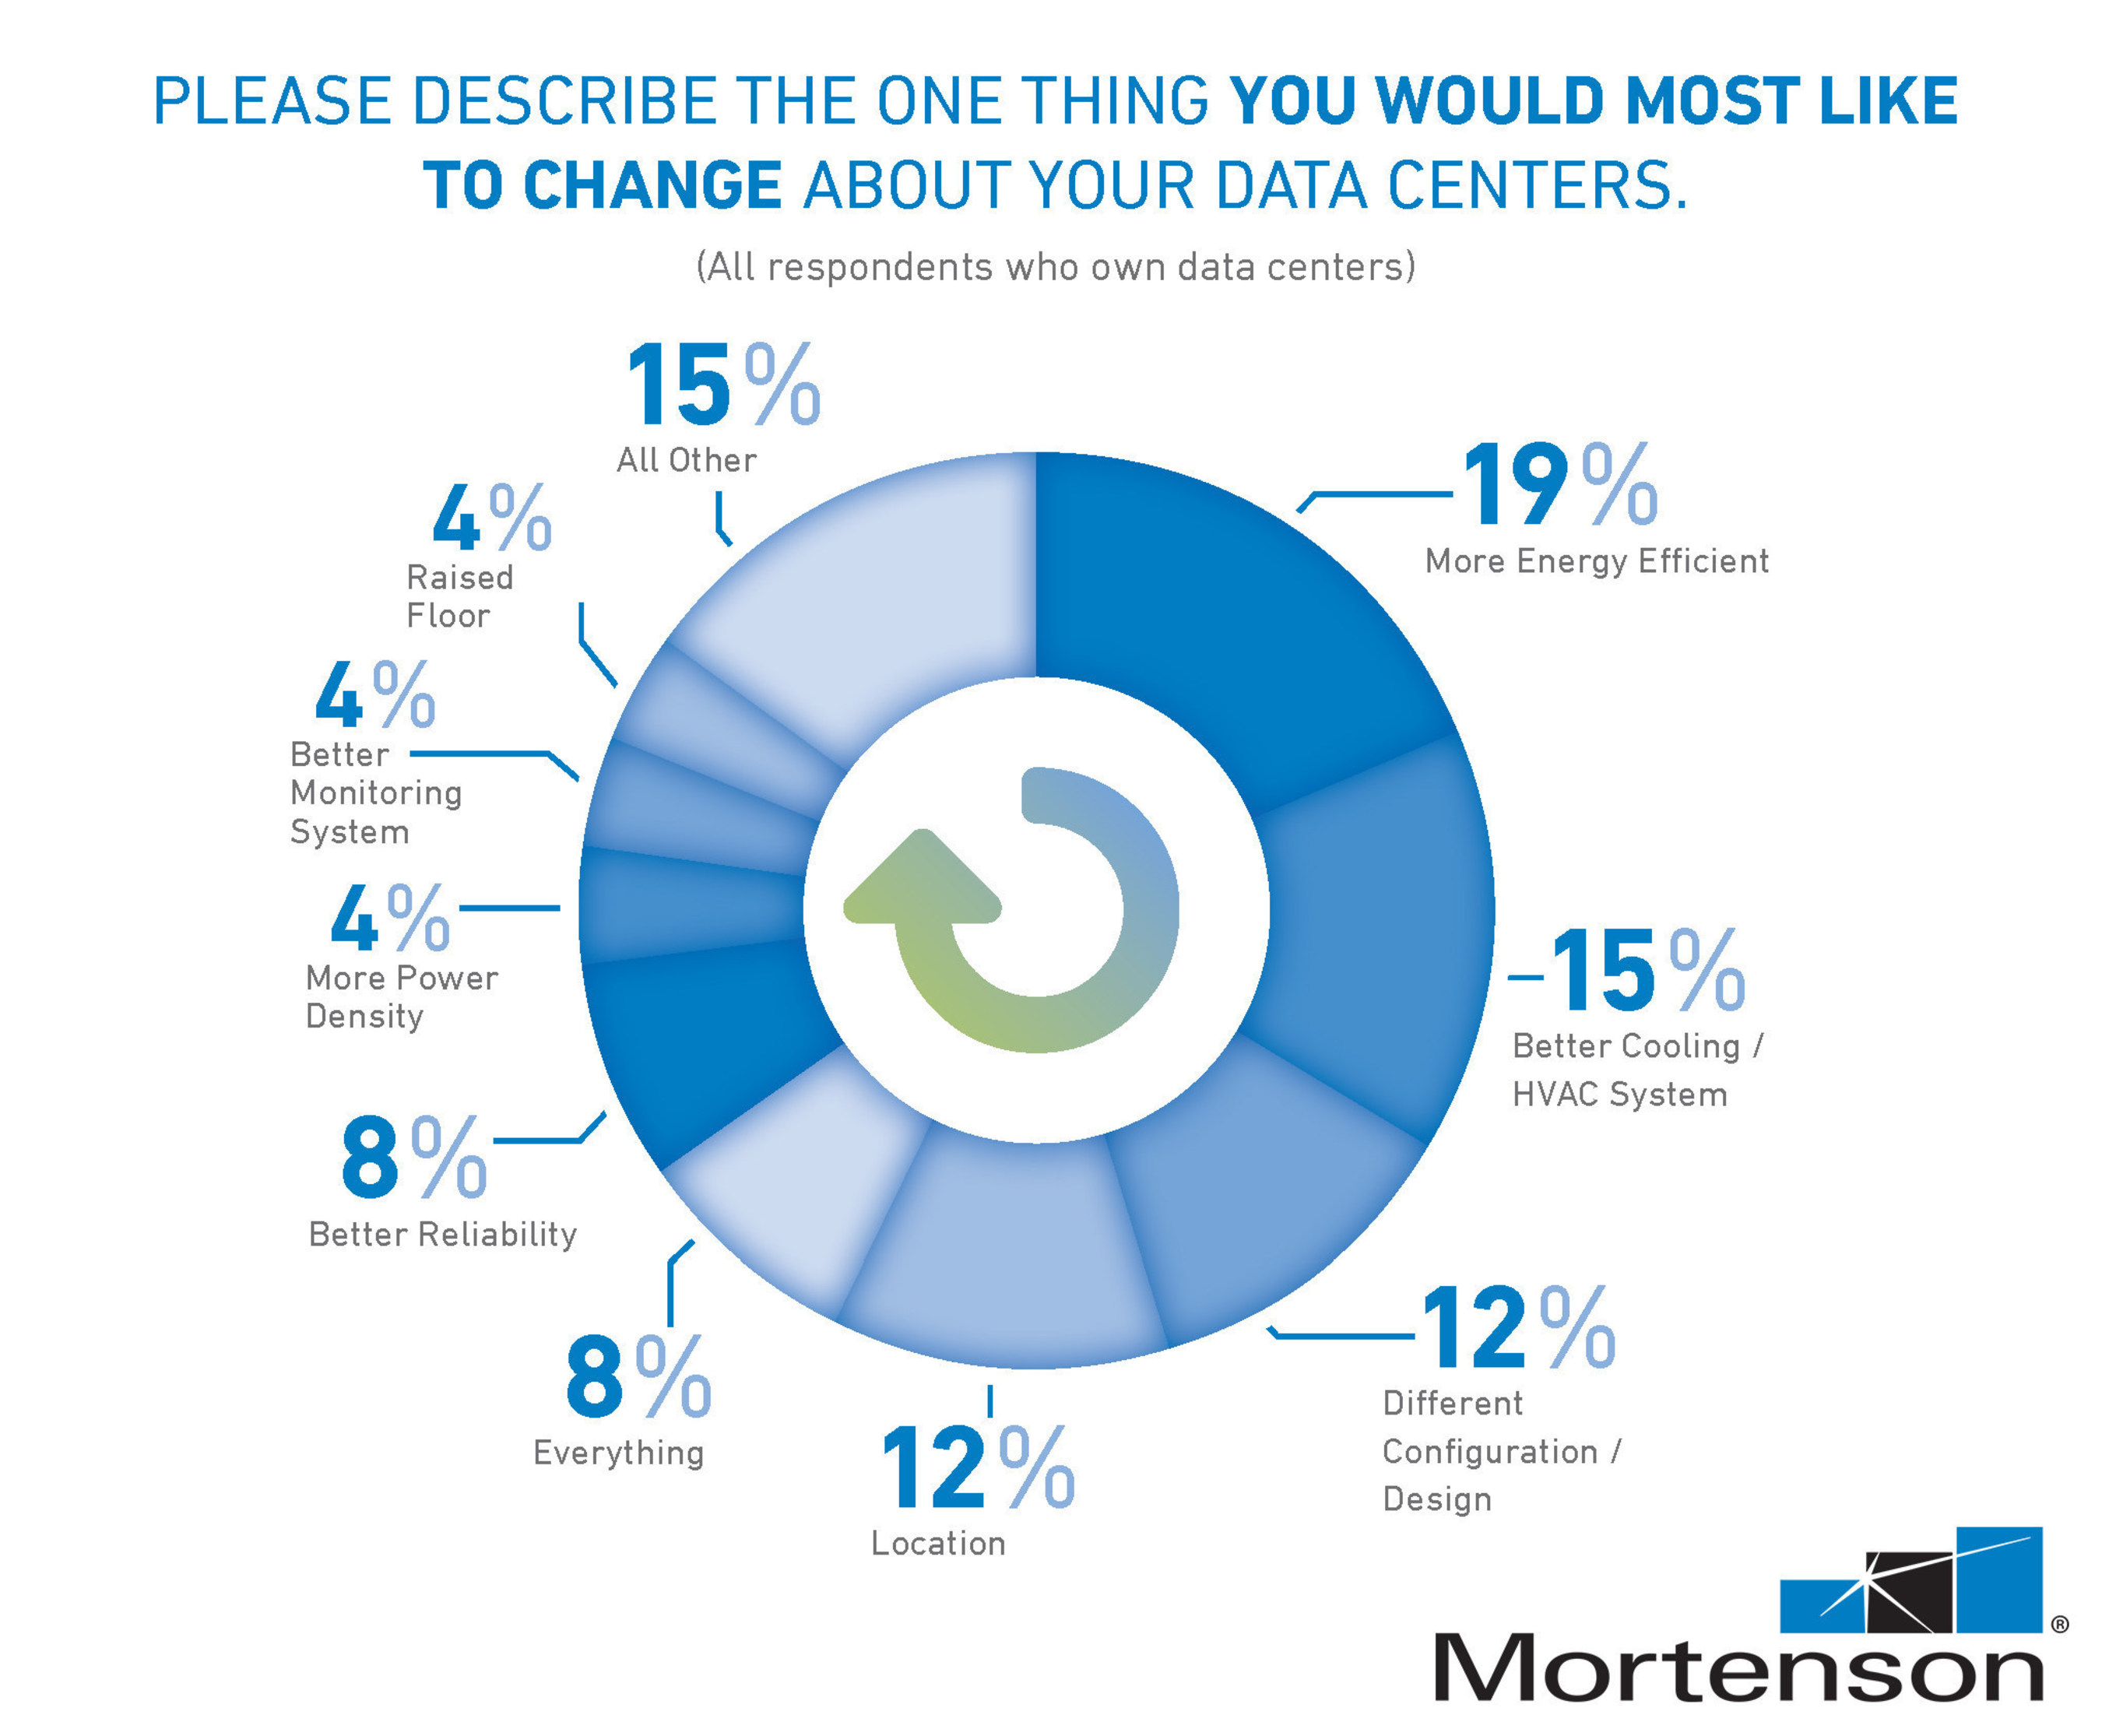 Mortenson survey respondents revealed what they'd like to change about their data centers if they had the chance.